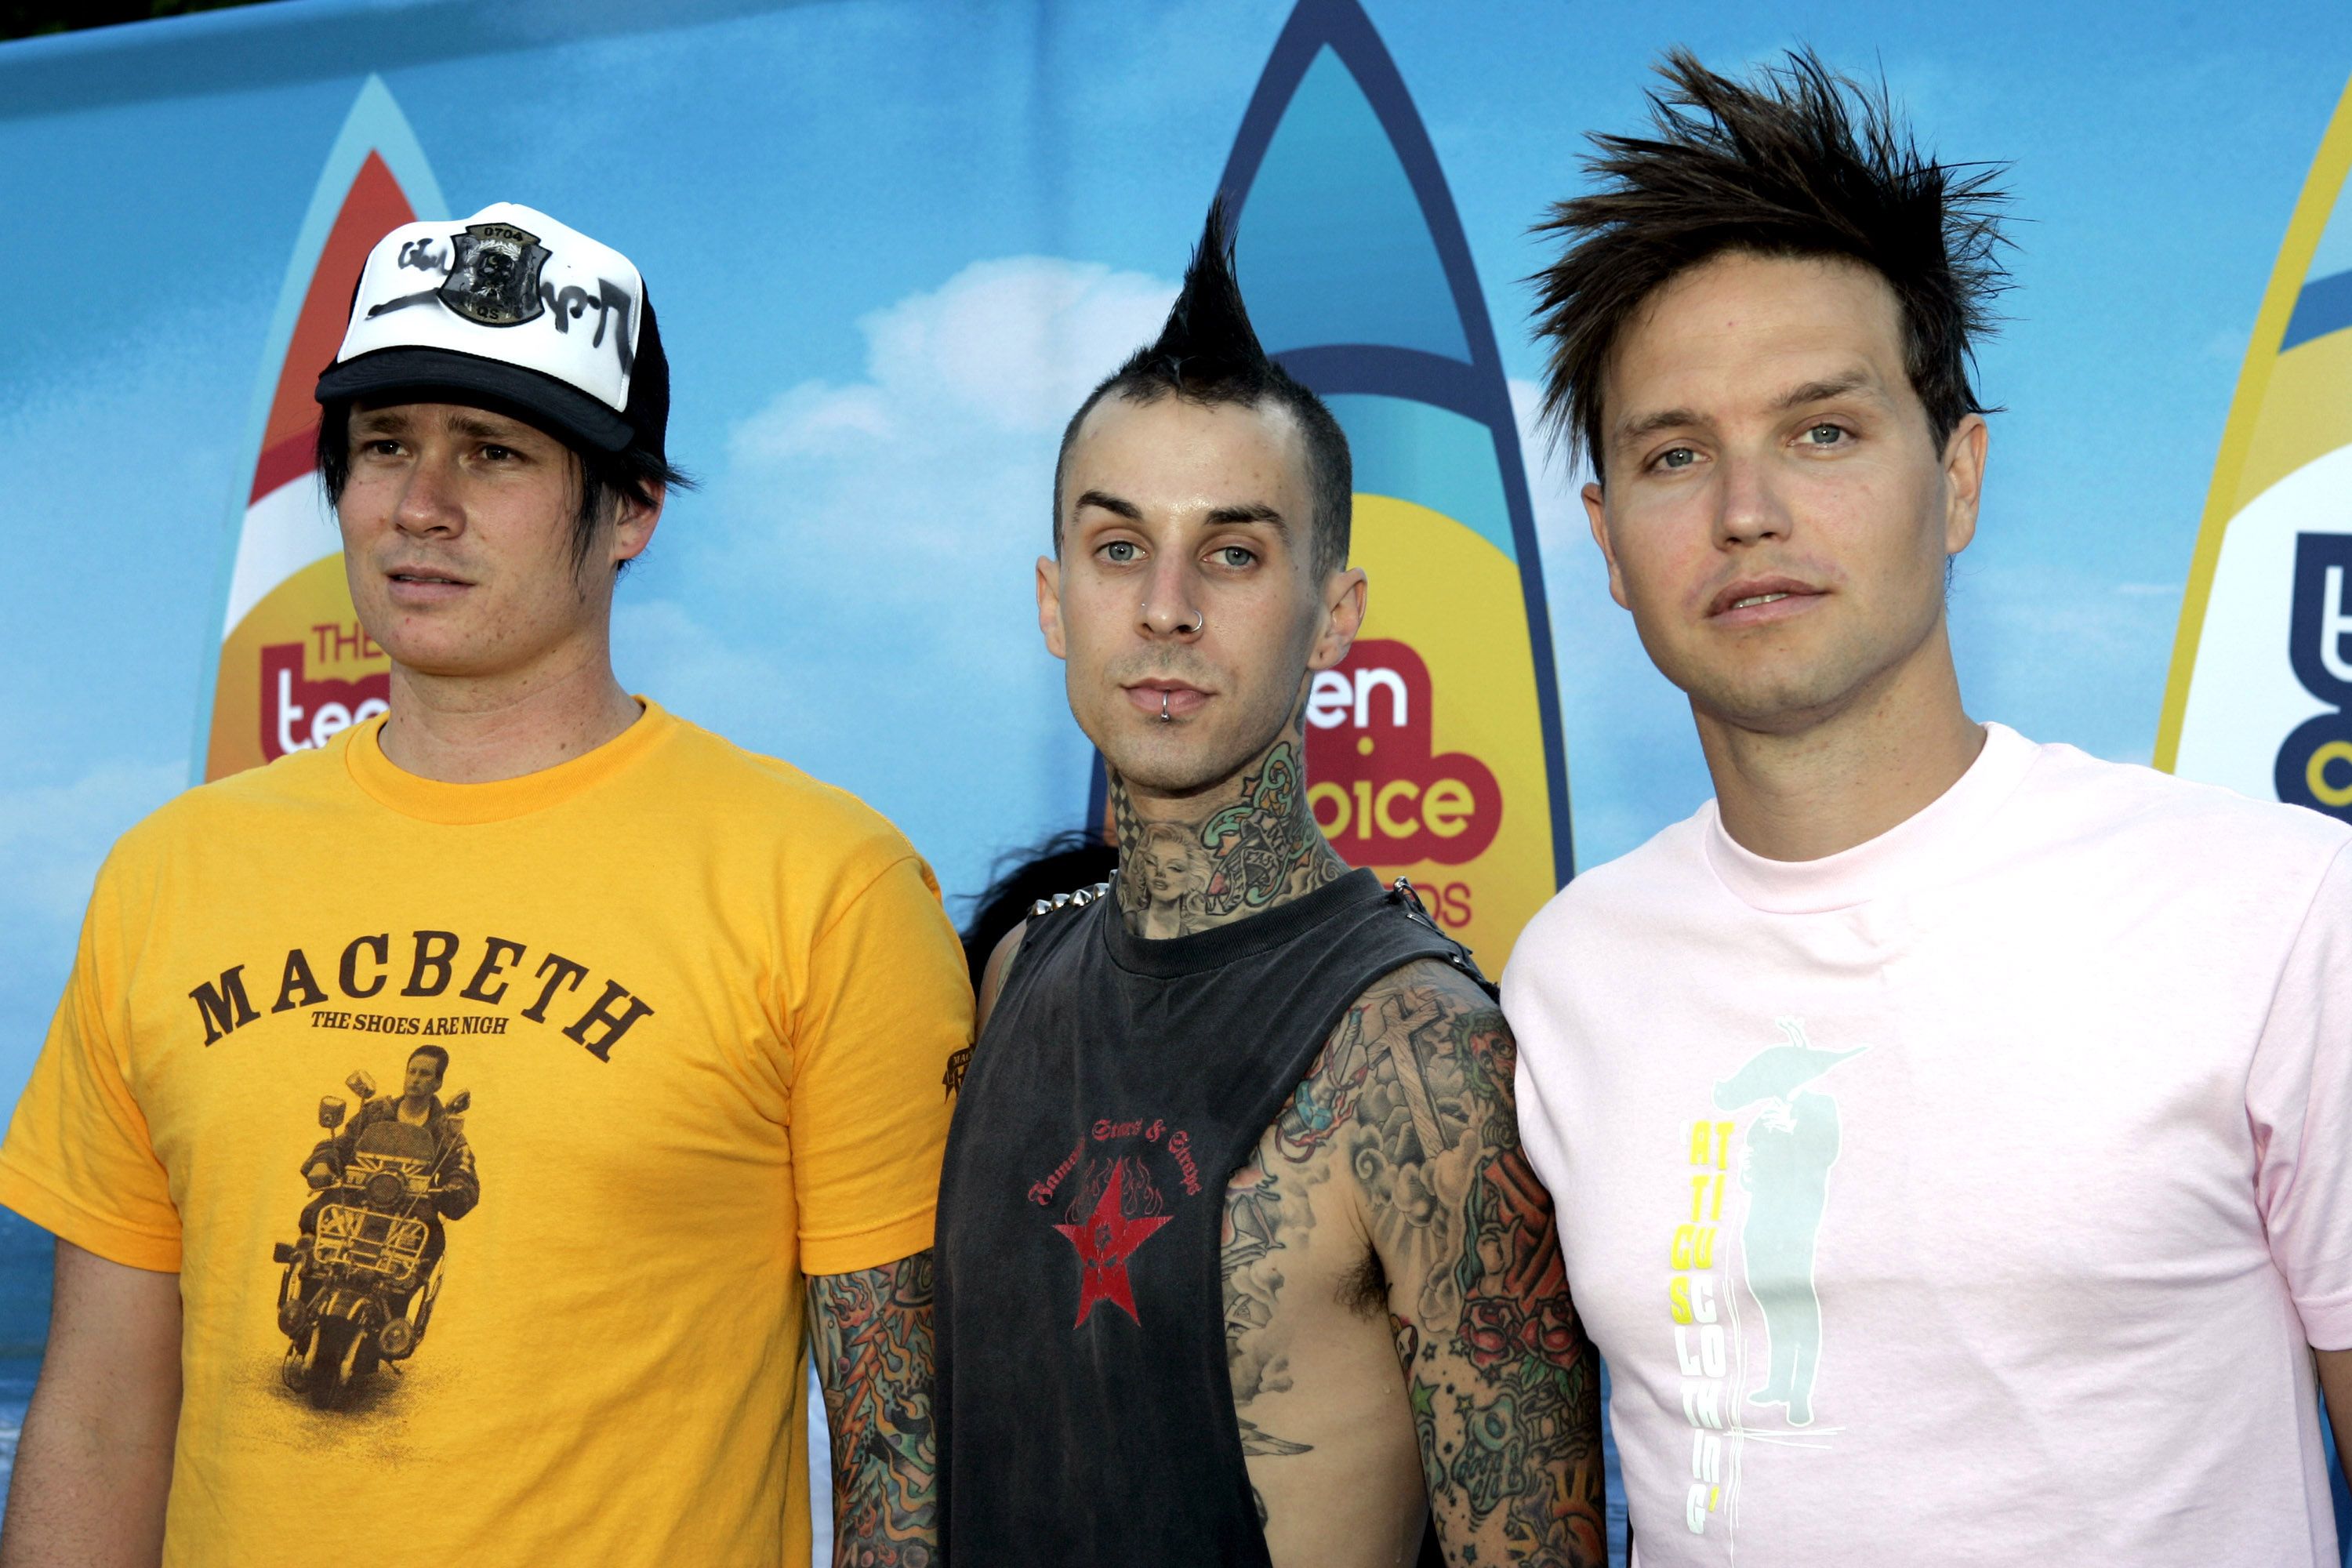 Am I going crazy or that looks like Toms sleeve on the left  rBlink182